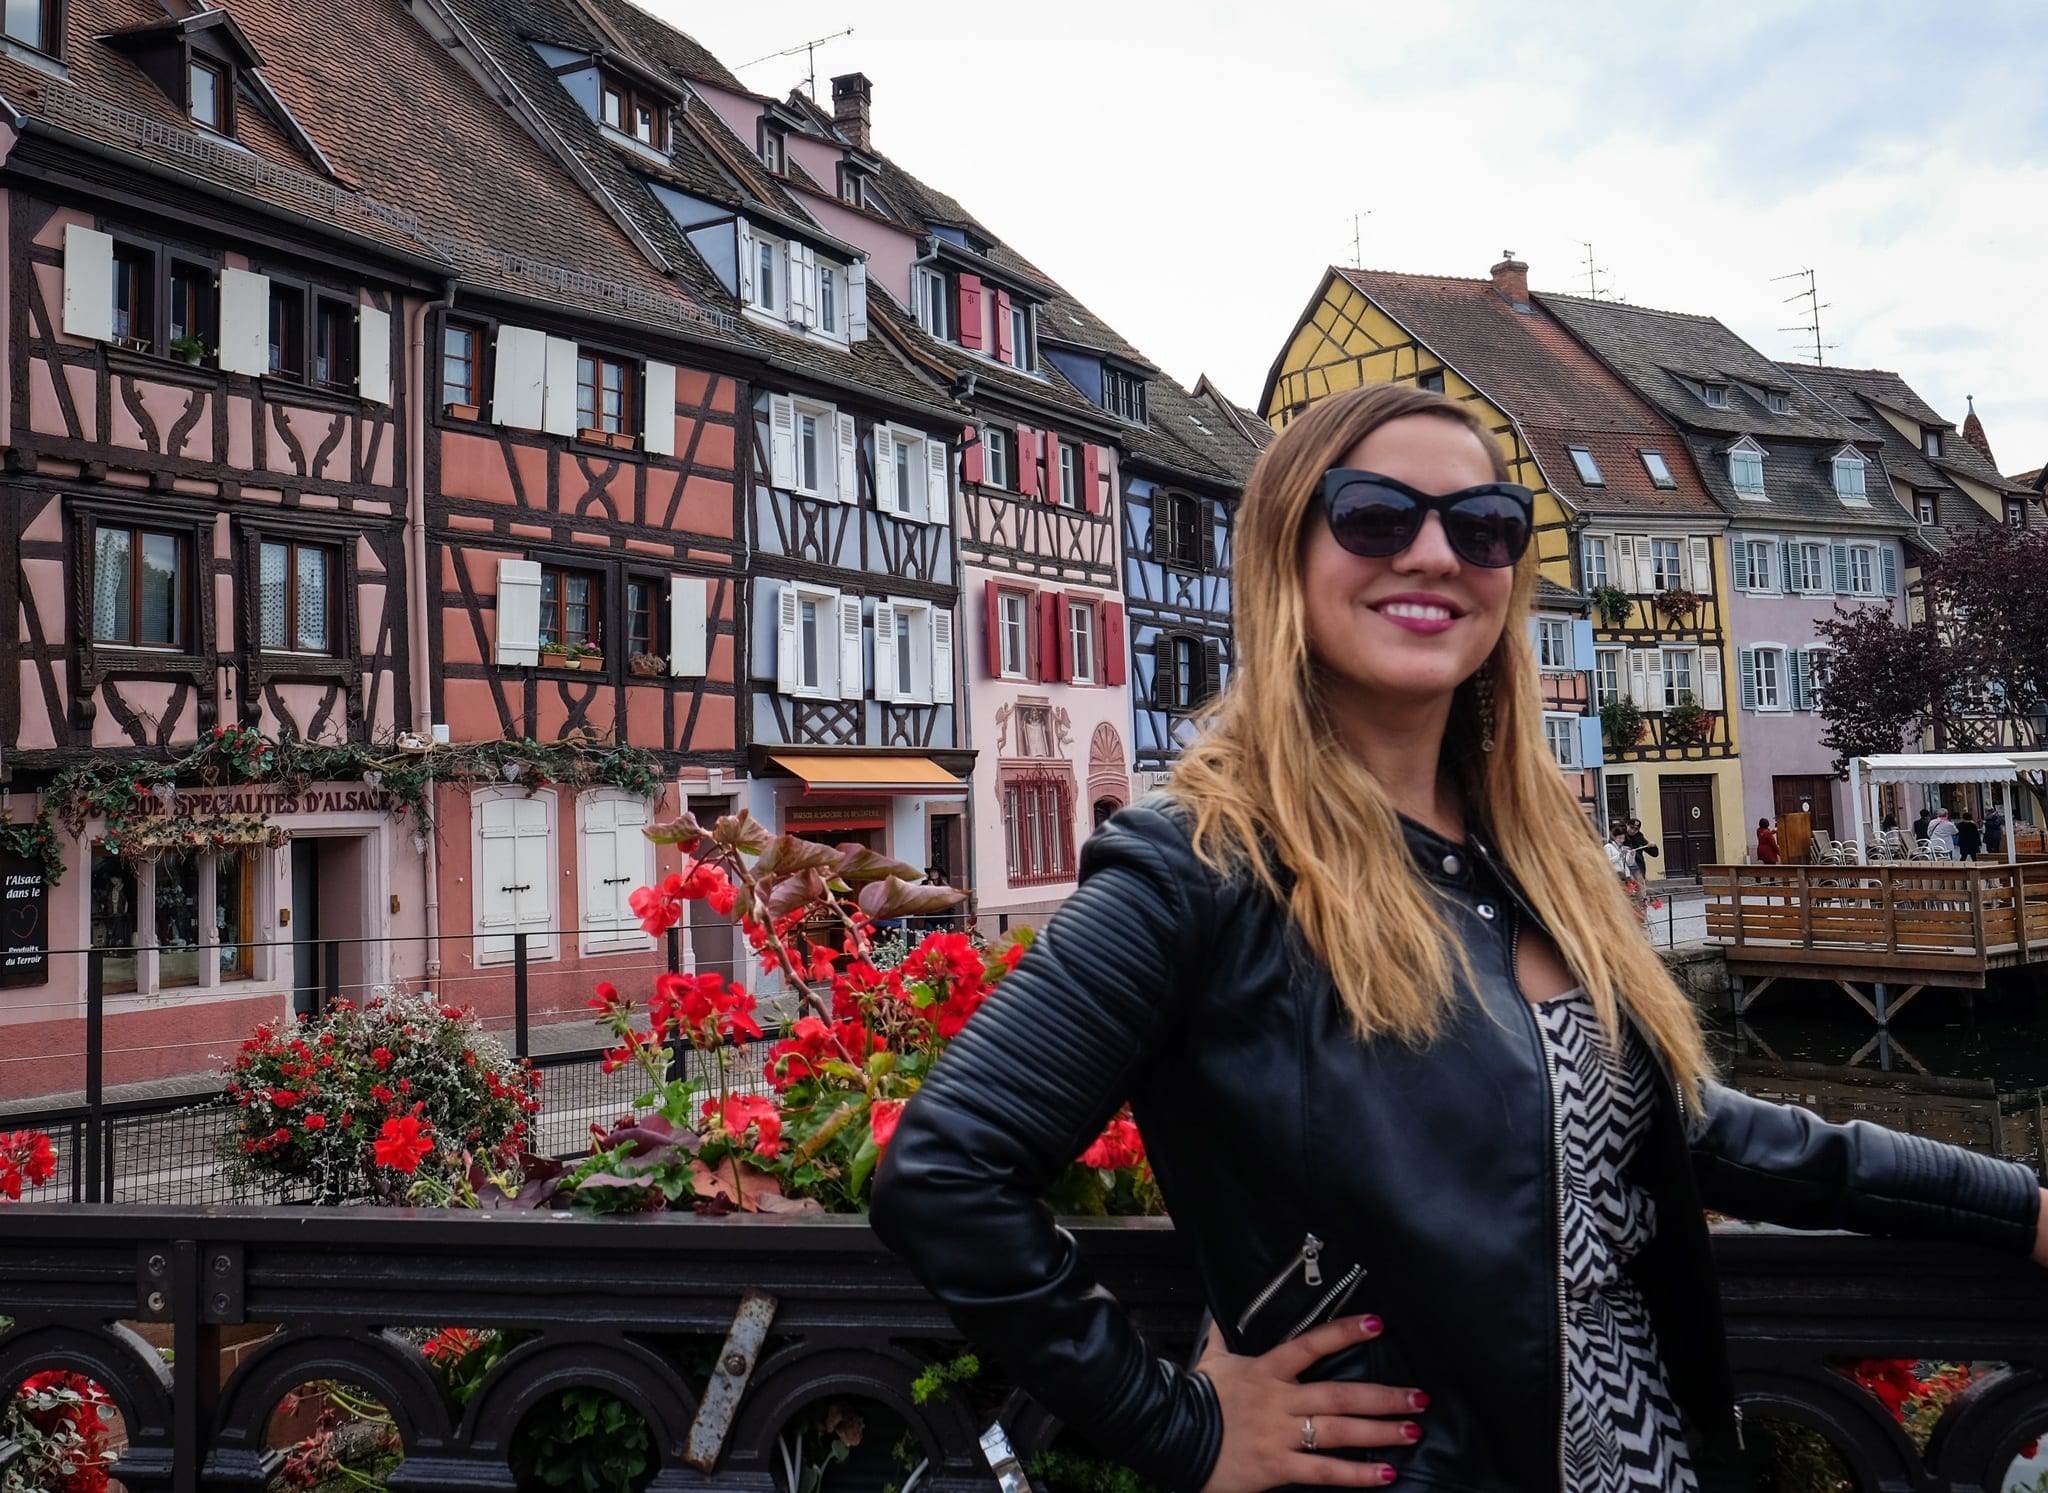 best european cities to visit for solo female travelers